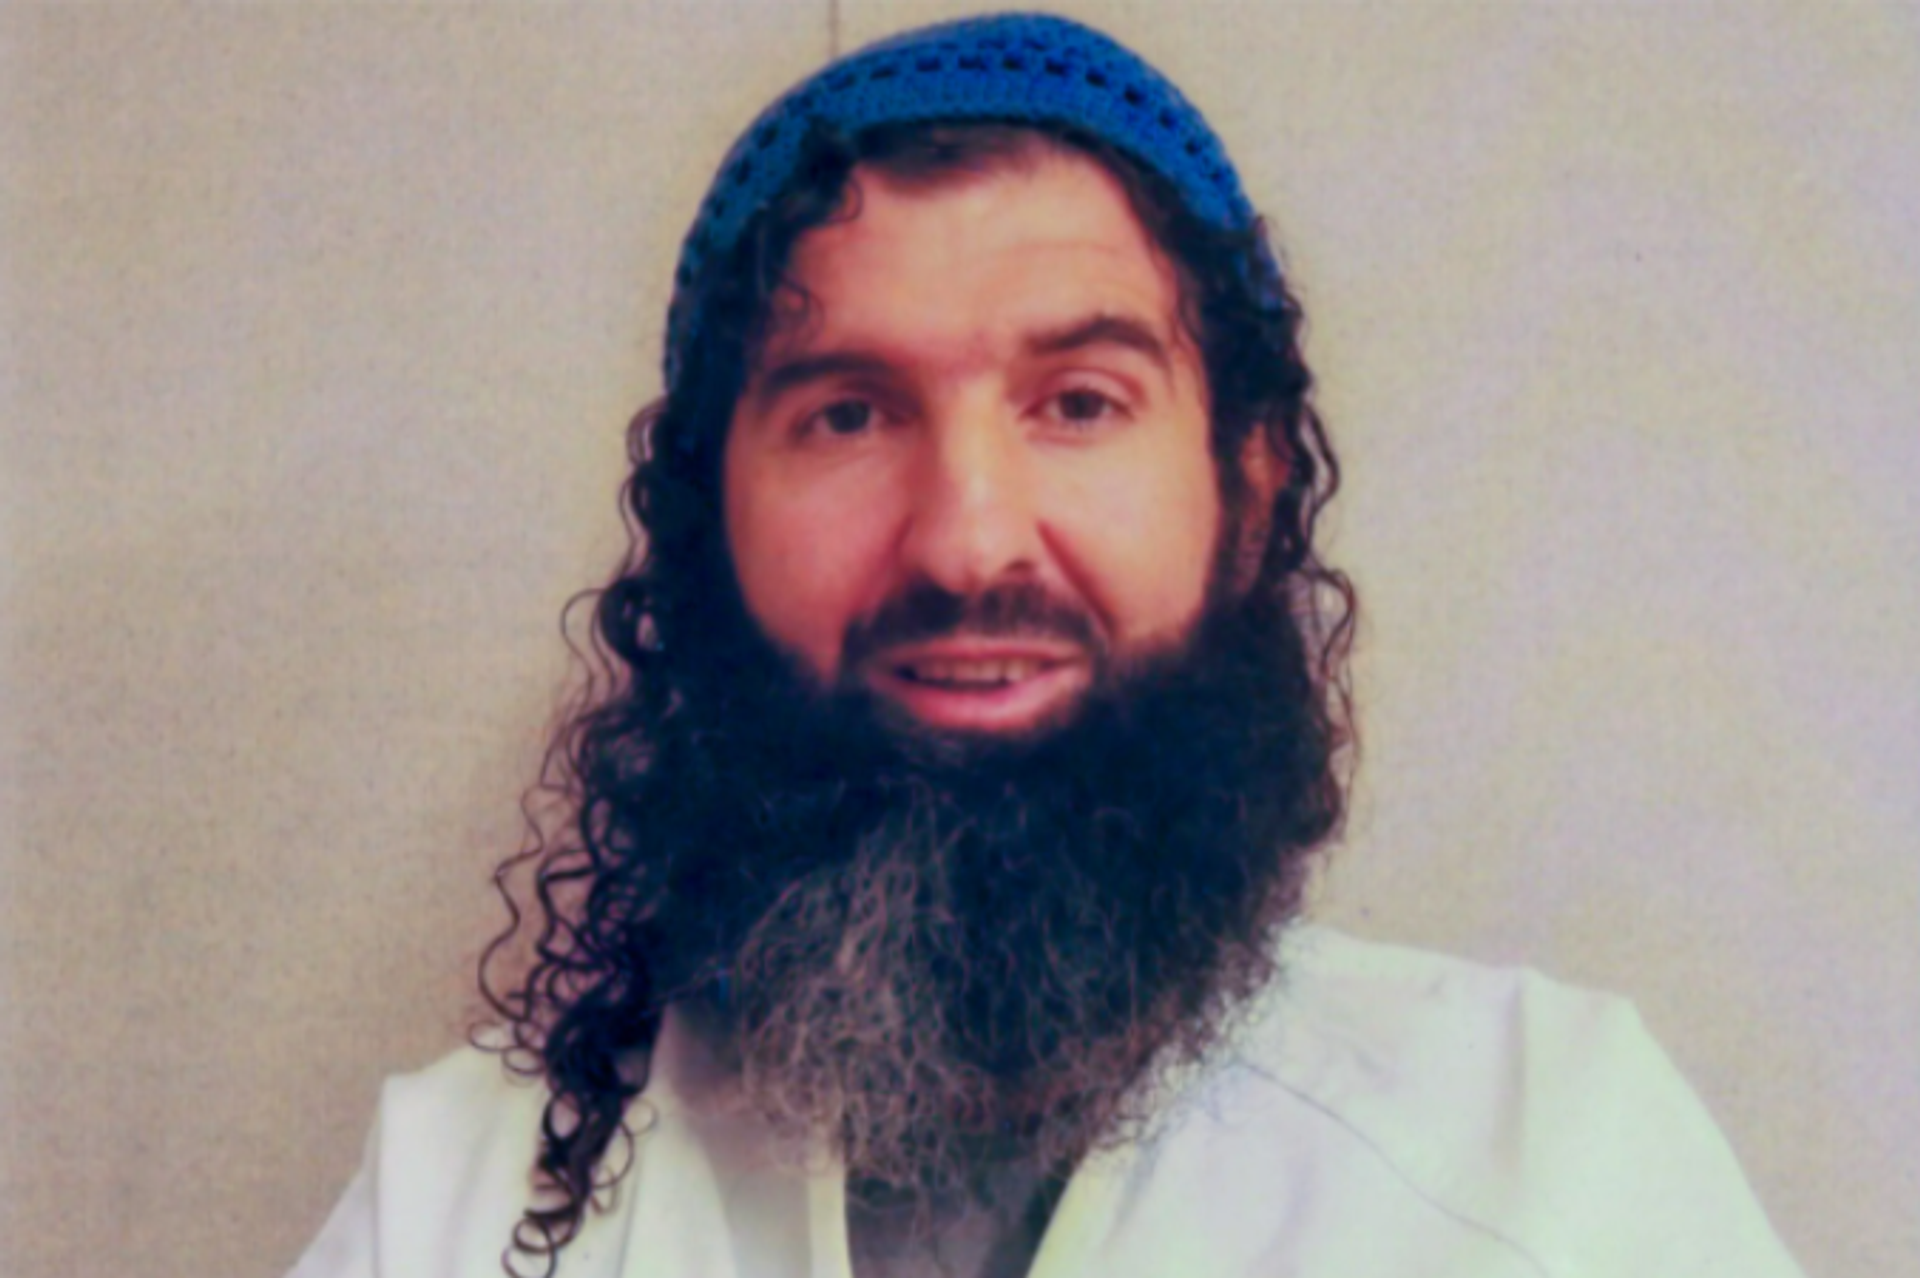 Sufyian Barhoumi, an Algerian national previously detained at the US' Guantanamo Bay detention facility, was released and repatriated to home country, according to a Pentagon announcement on April 2. Barhoumi's transfer was notably sidelined during the Trump administration, resulting in five years of delays that ultimately blocked Barhoumi from being reunited with his father before he passed.  - Sputnik International, 1920, 03.04.2022